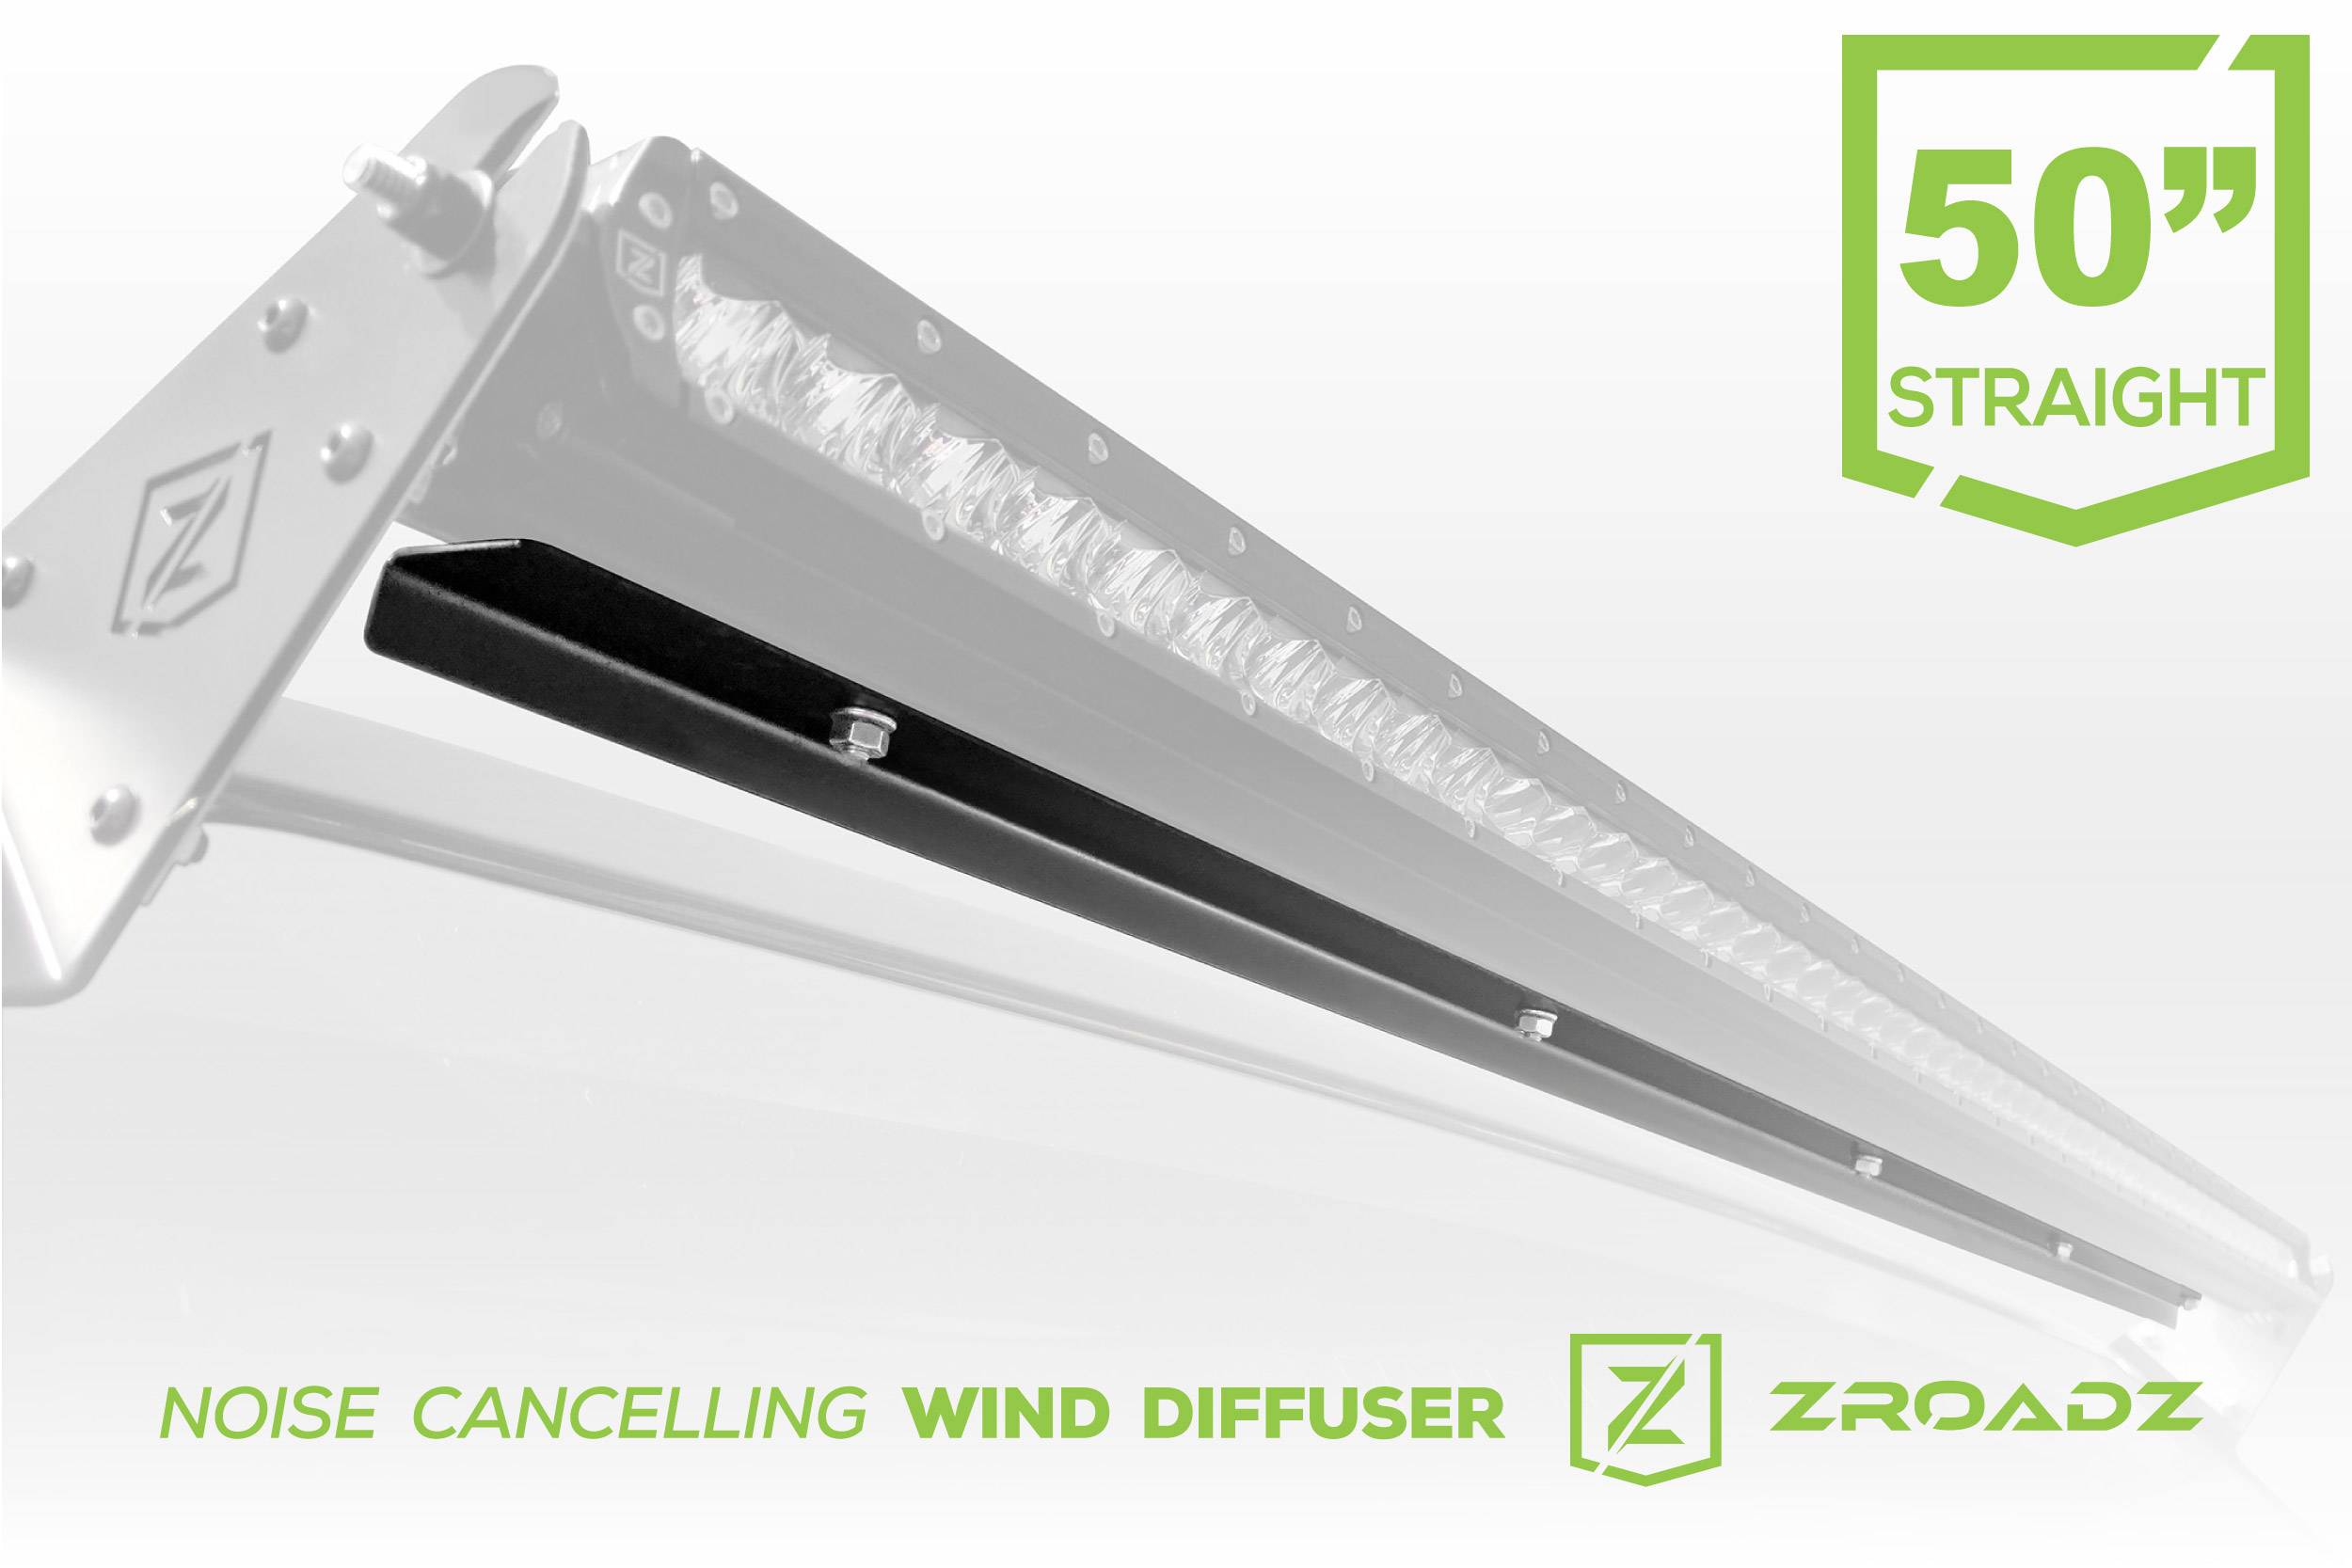 ZROADZ OFF ROAD PRODUCTS - Bolt-On Noise Cancelling Wind Diffuser for 50 Inch Straight Single Row LED Light Bar - Part # Z330051S